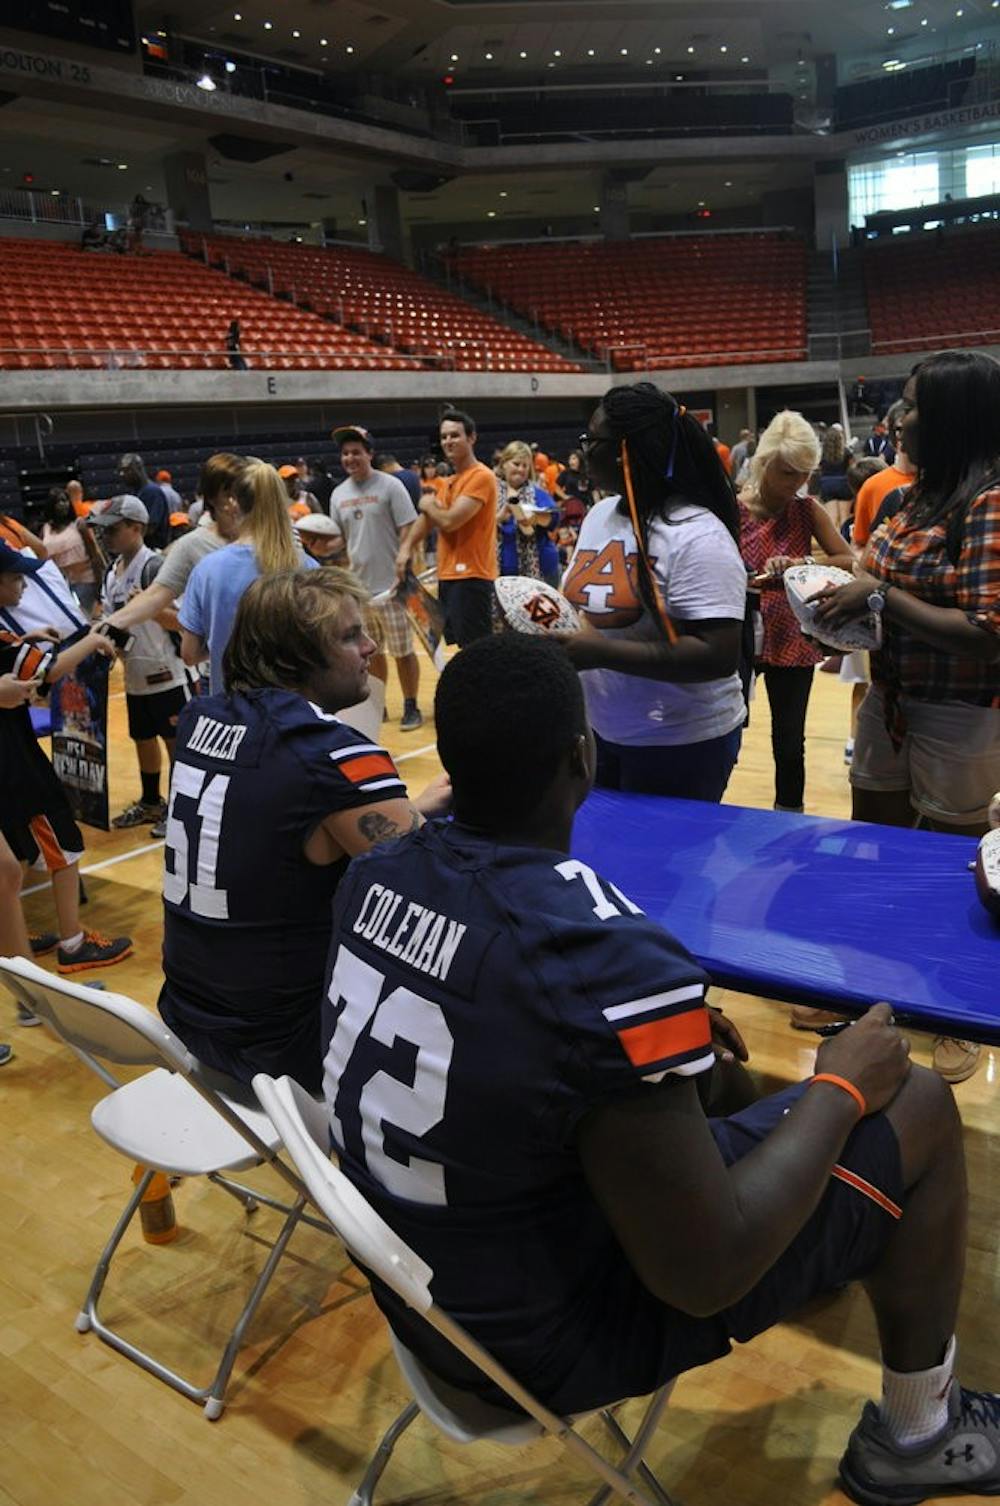 <p>Offensive linemen, Patrick Miller and Shon Coleman at Fan Day 2013. (File photo)</p>